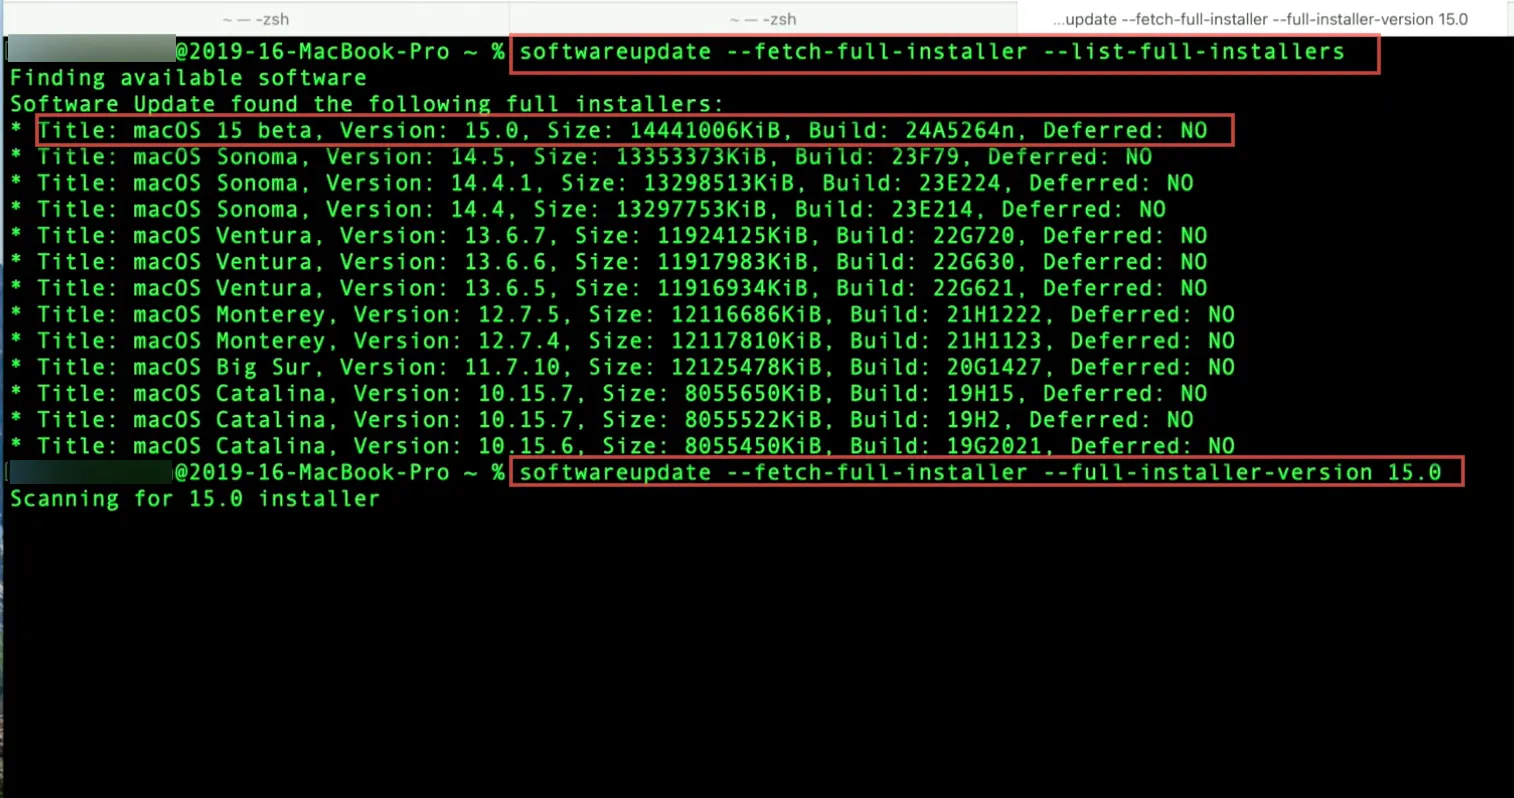 How to download macOS Sequoia from Terminal